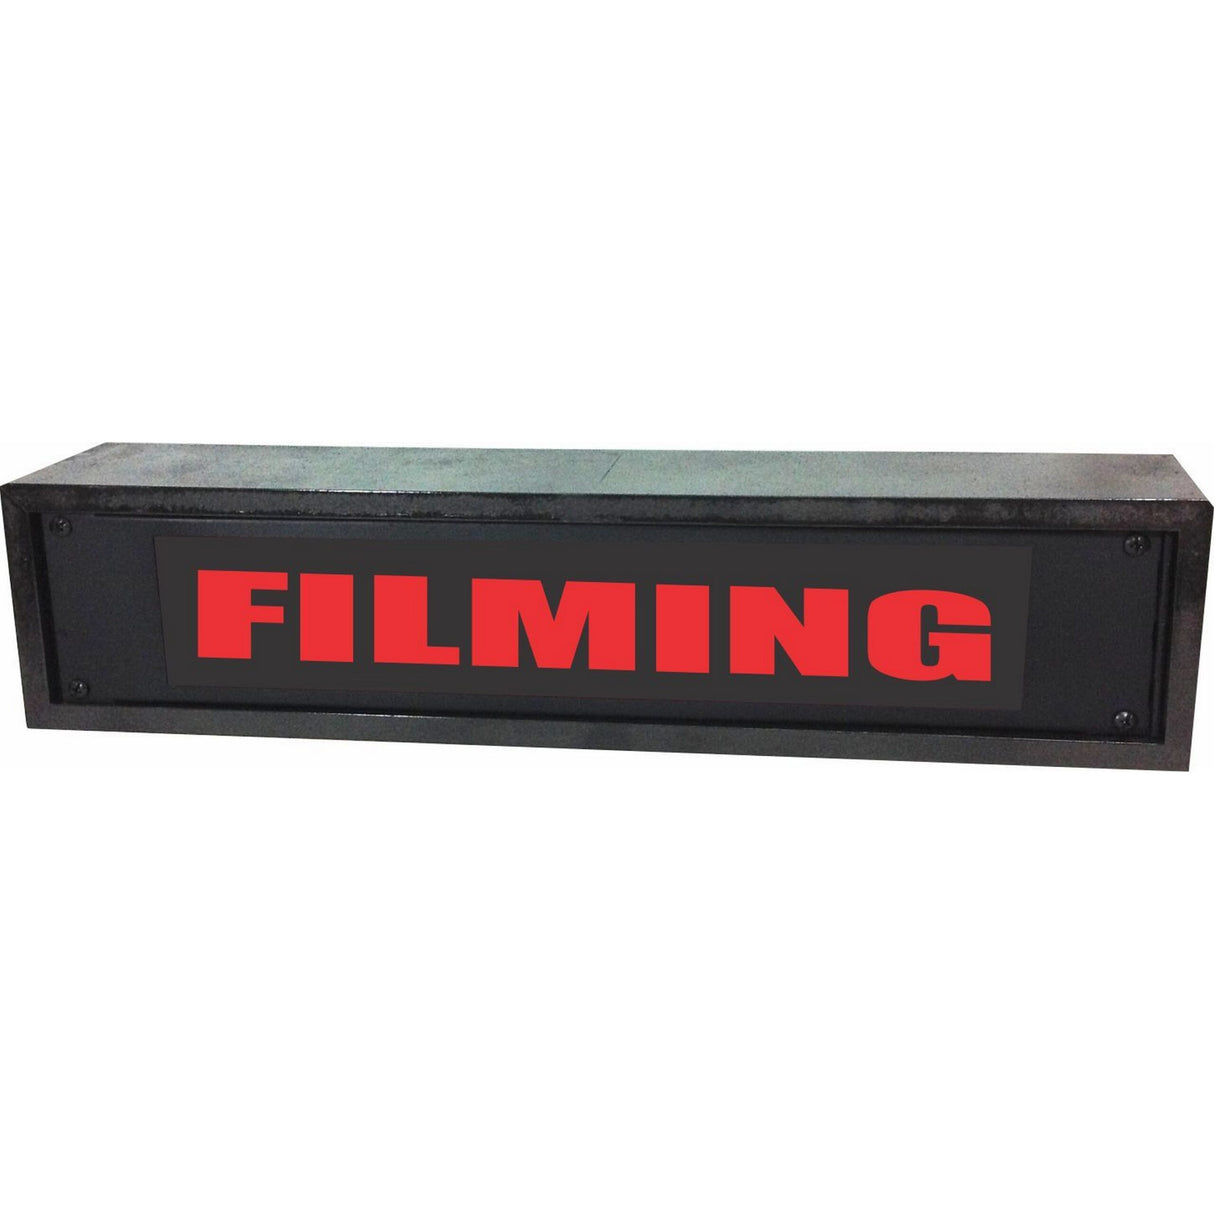 American Recorder OAS-4056RD "FILIMING" 2U Rackmount LED Lighted Sign with Enclosure, Red